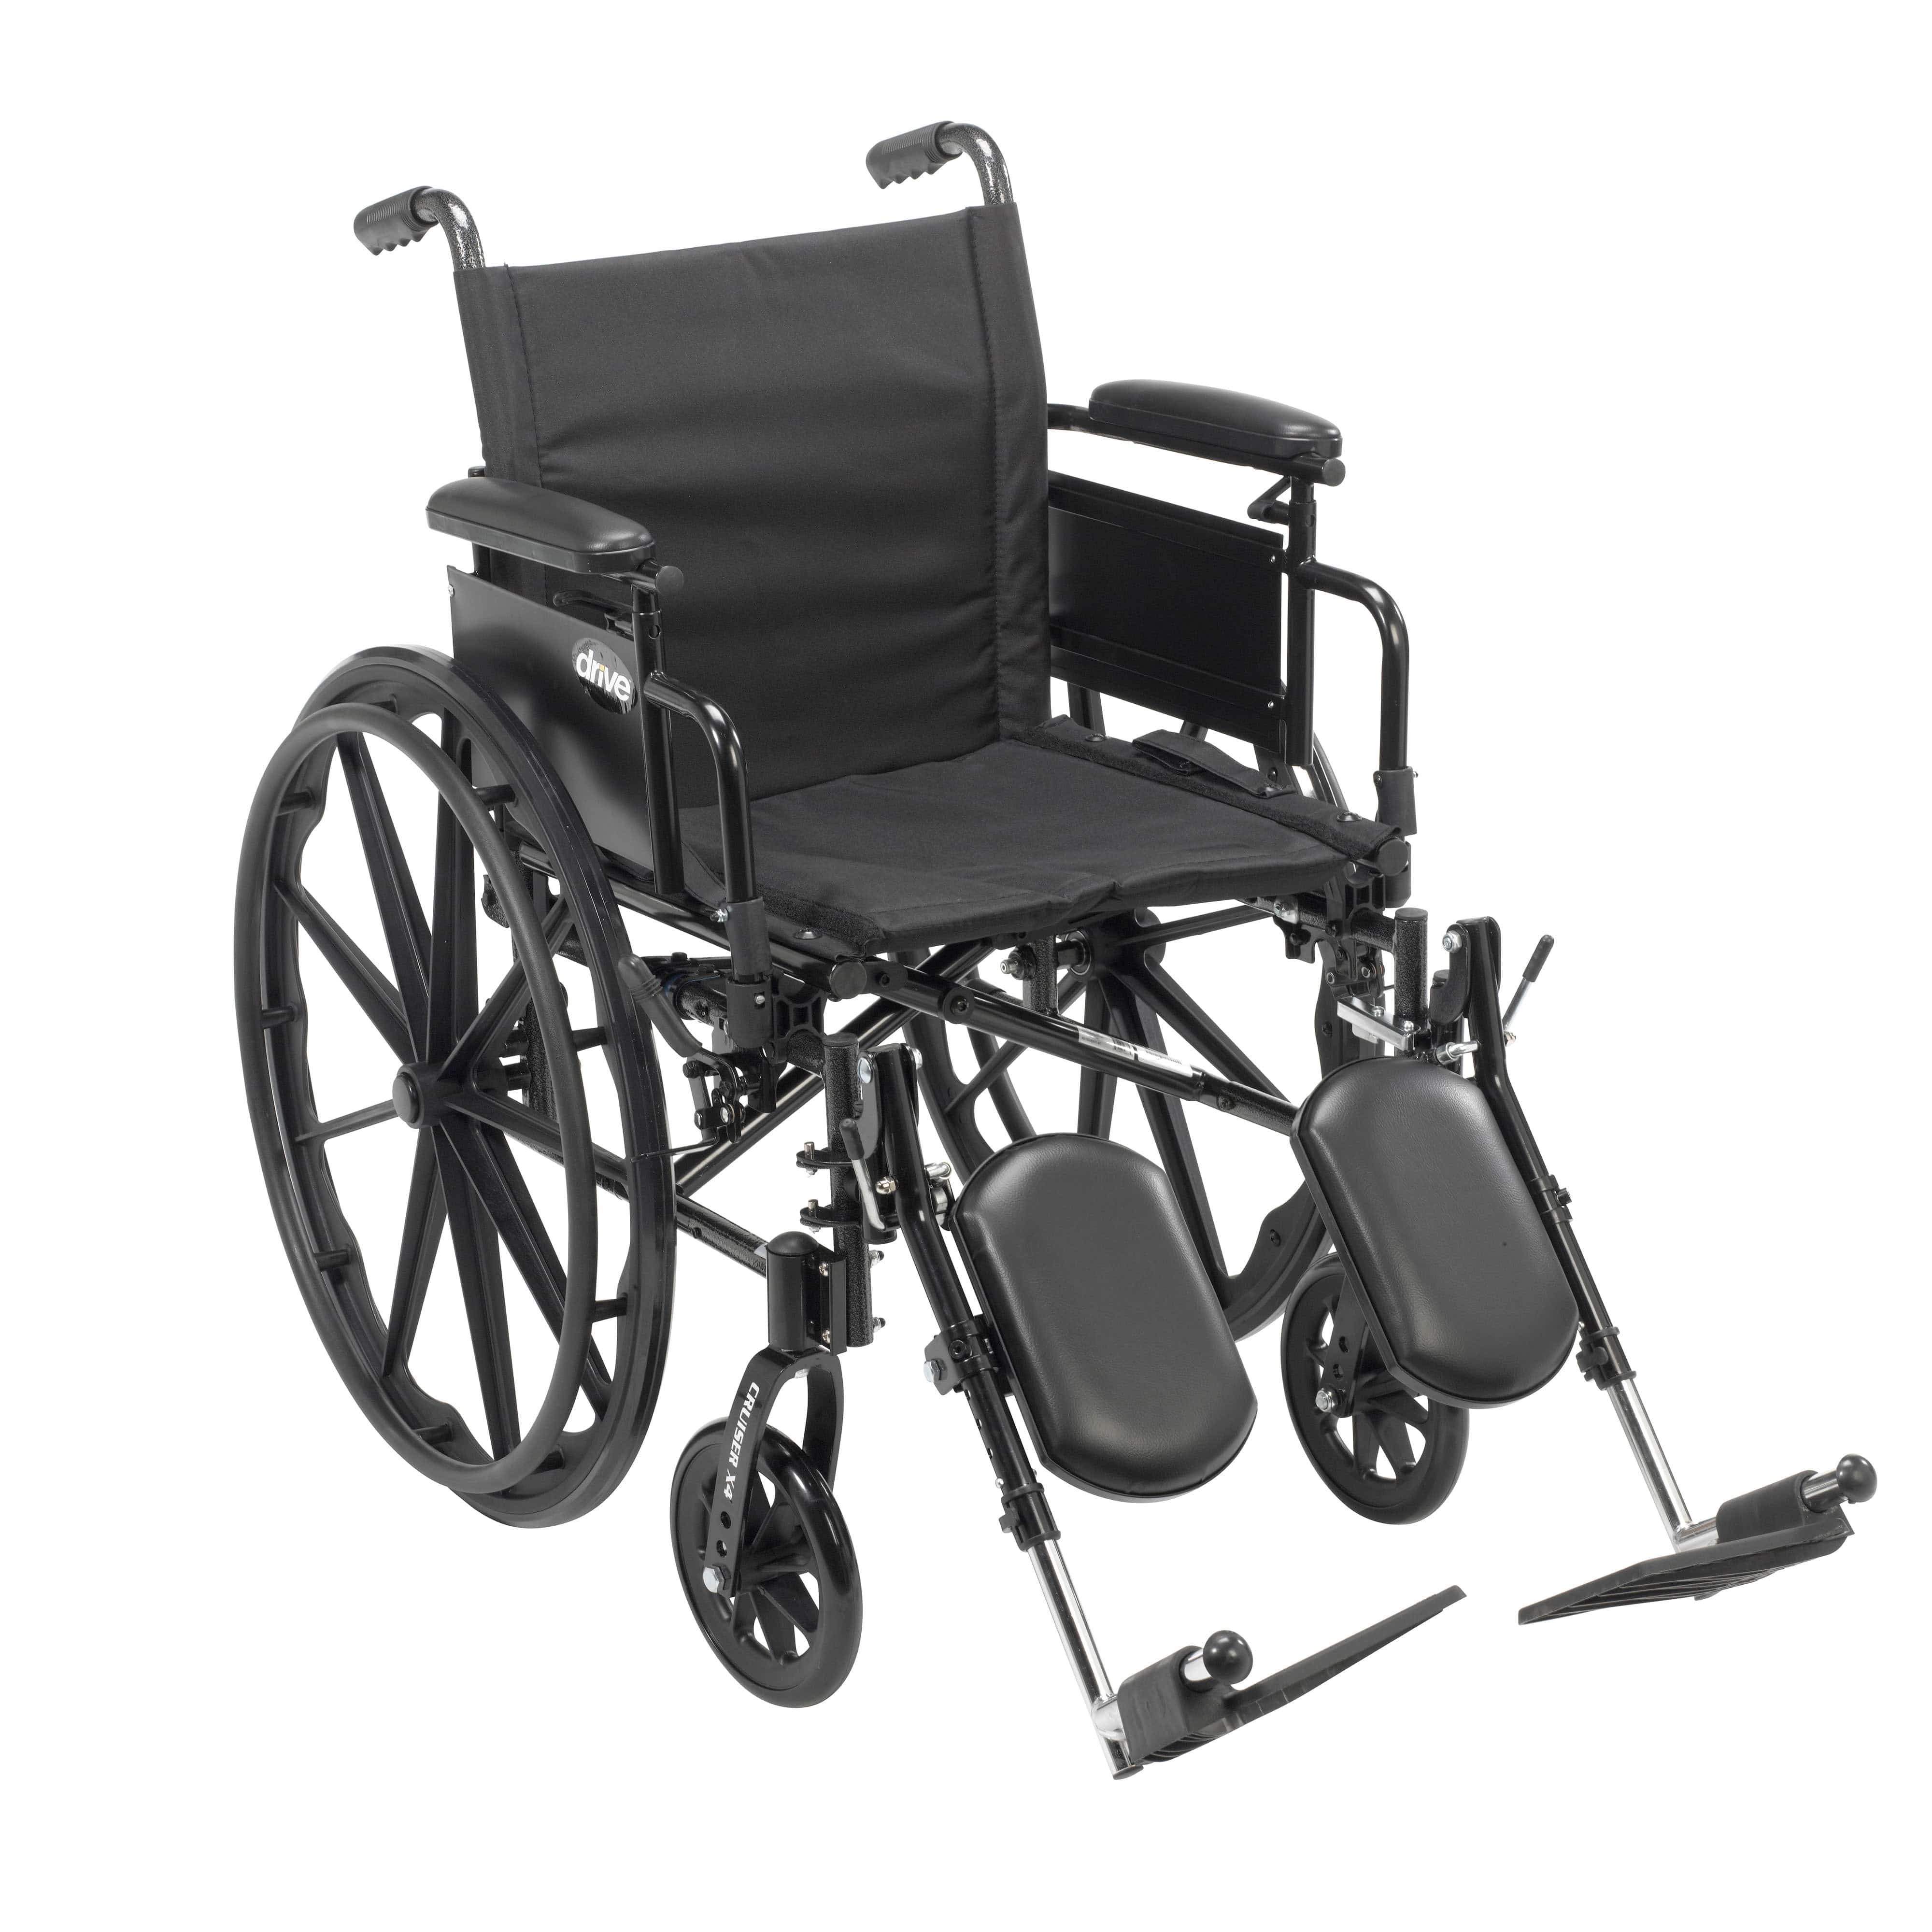 Drive Medical Wheelchairs/Lightweight Wheelchairs Desk Arms / Elevating Leg Rests / 18" Seat Drive Medical Cruiser X4 Lightweight Dual Axle Wheelchair with Adjustable Detatchable Arms